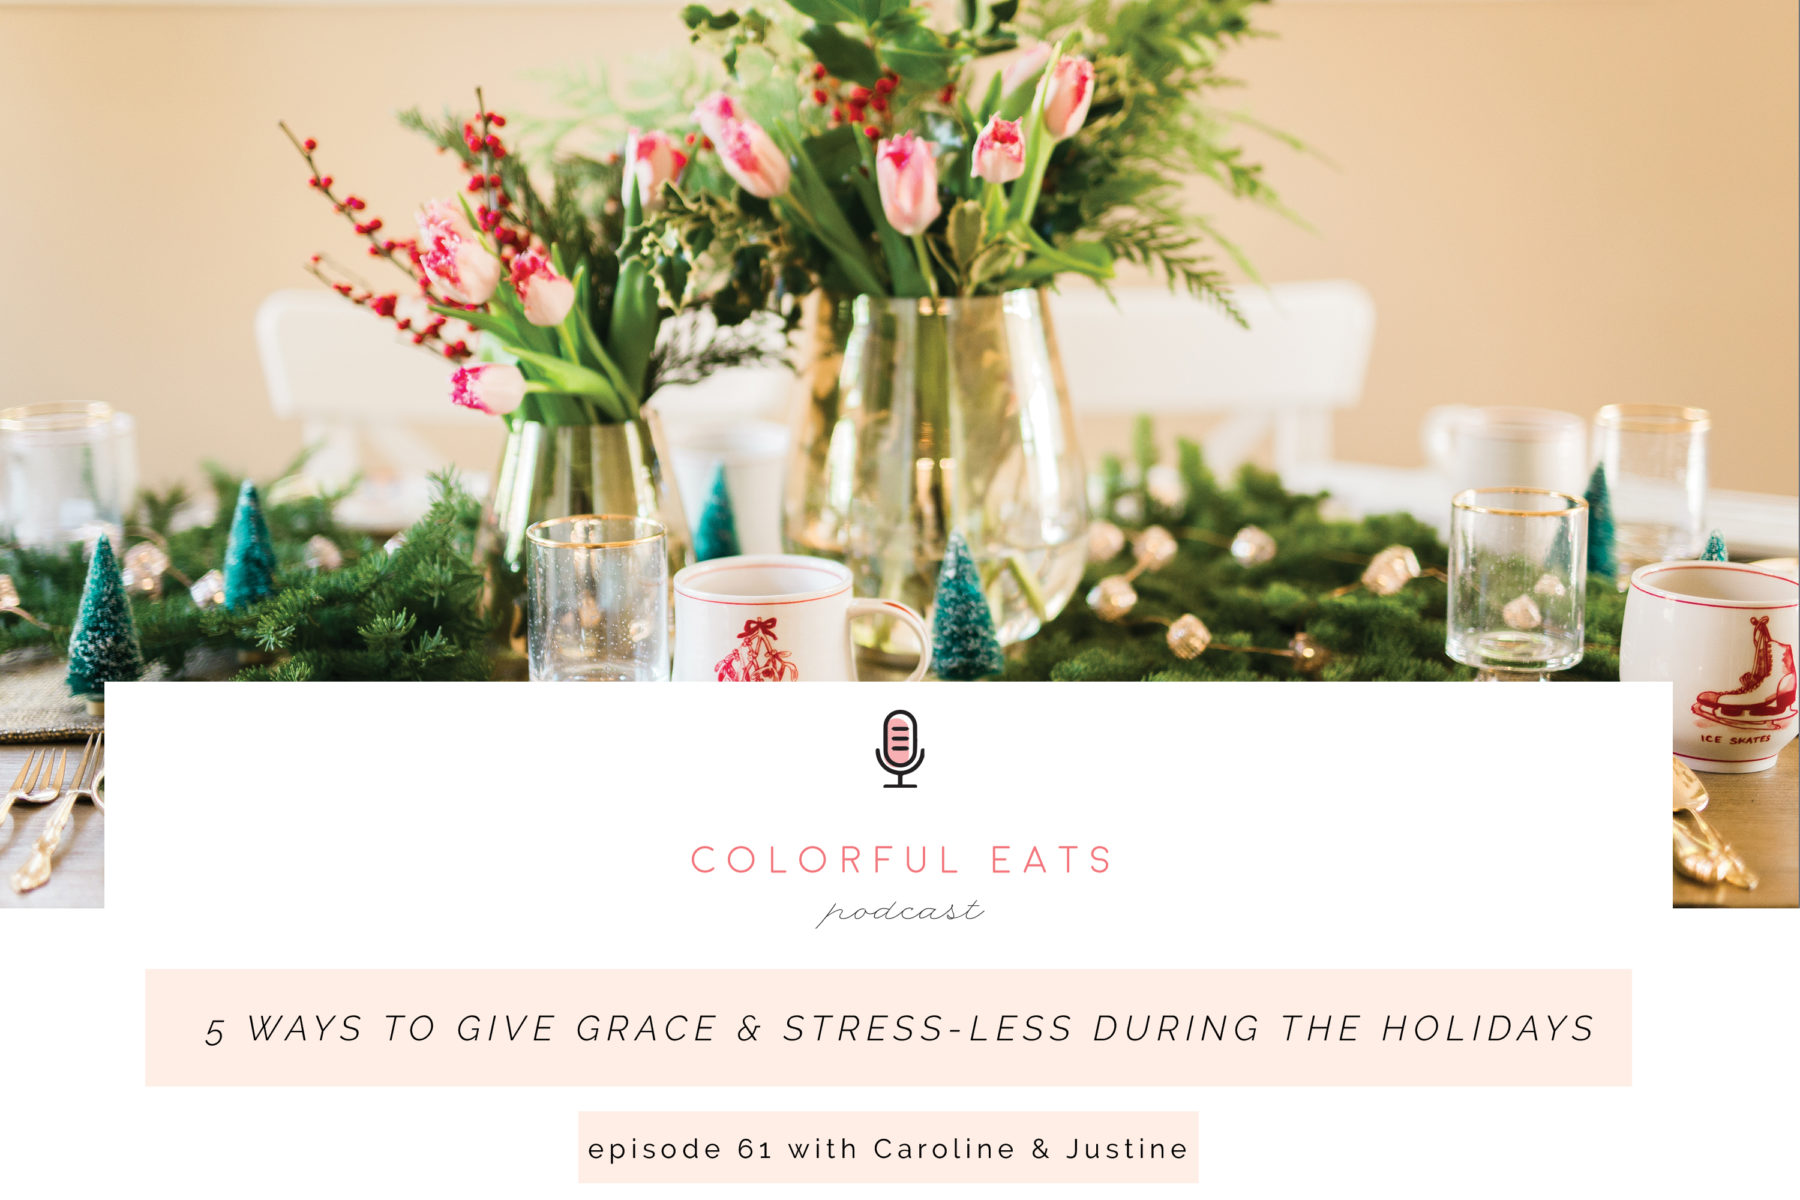 Colorful Eats Podcast Episode 61: 5 Ways to Give Grace and Stress-less During the Holidays